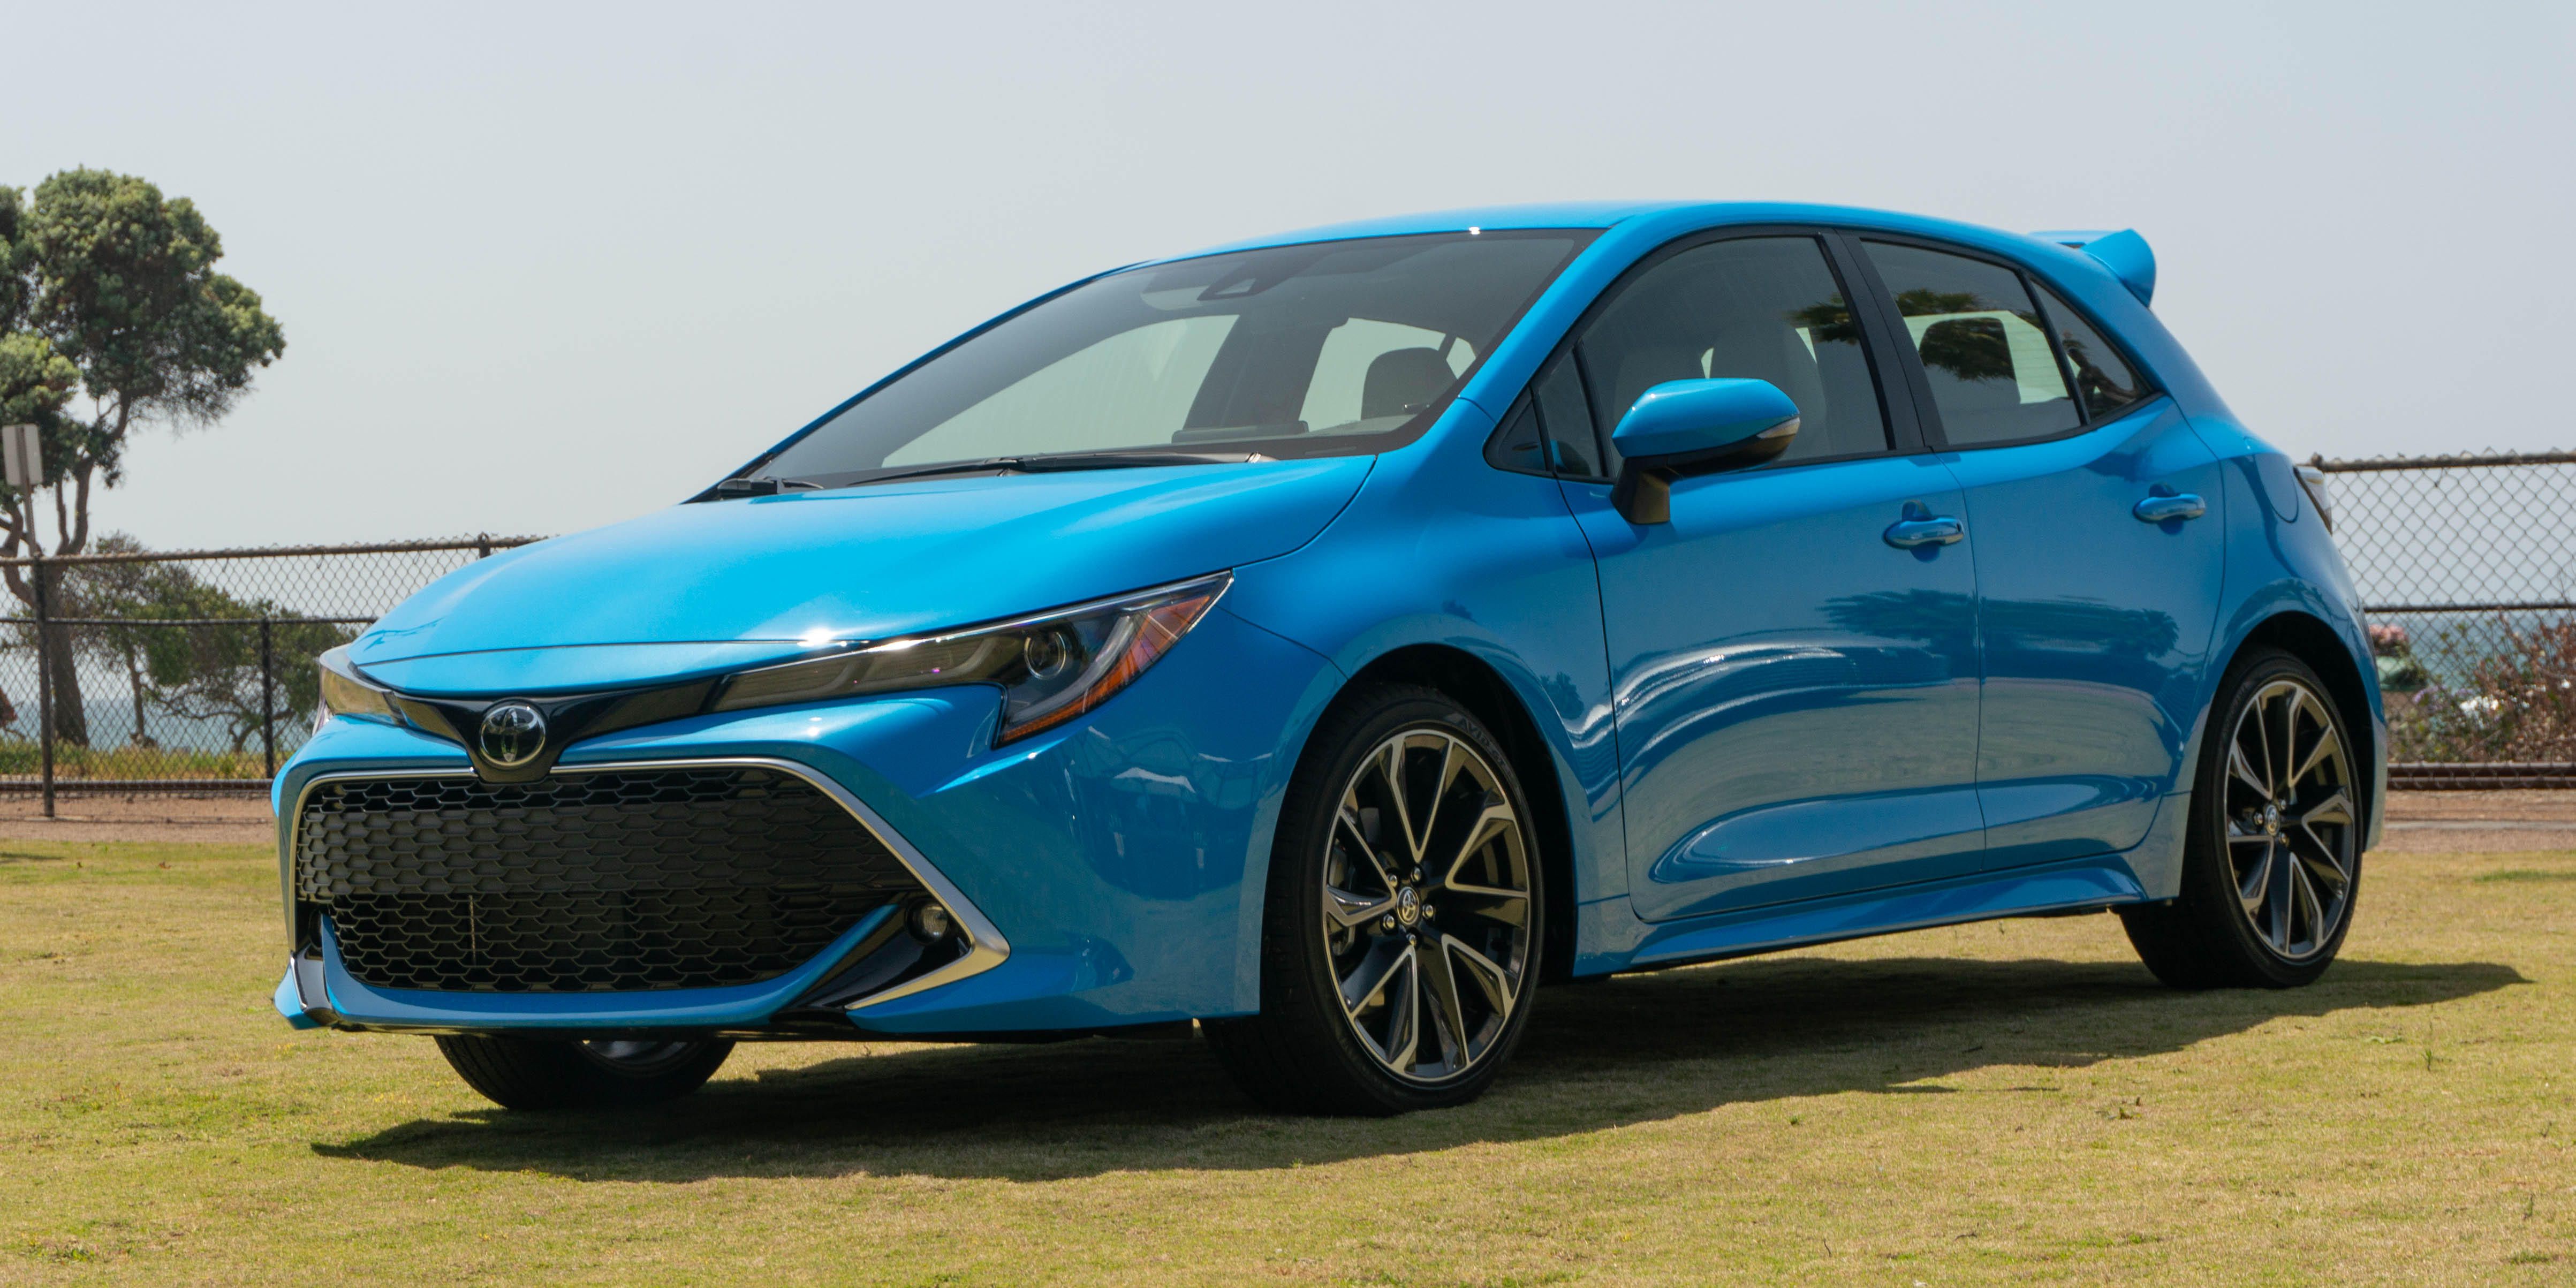 Toyota Corolla Hatchback hd specifications